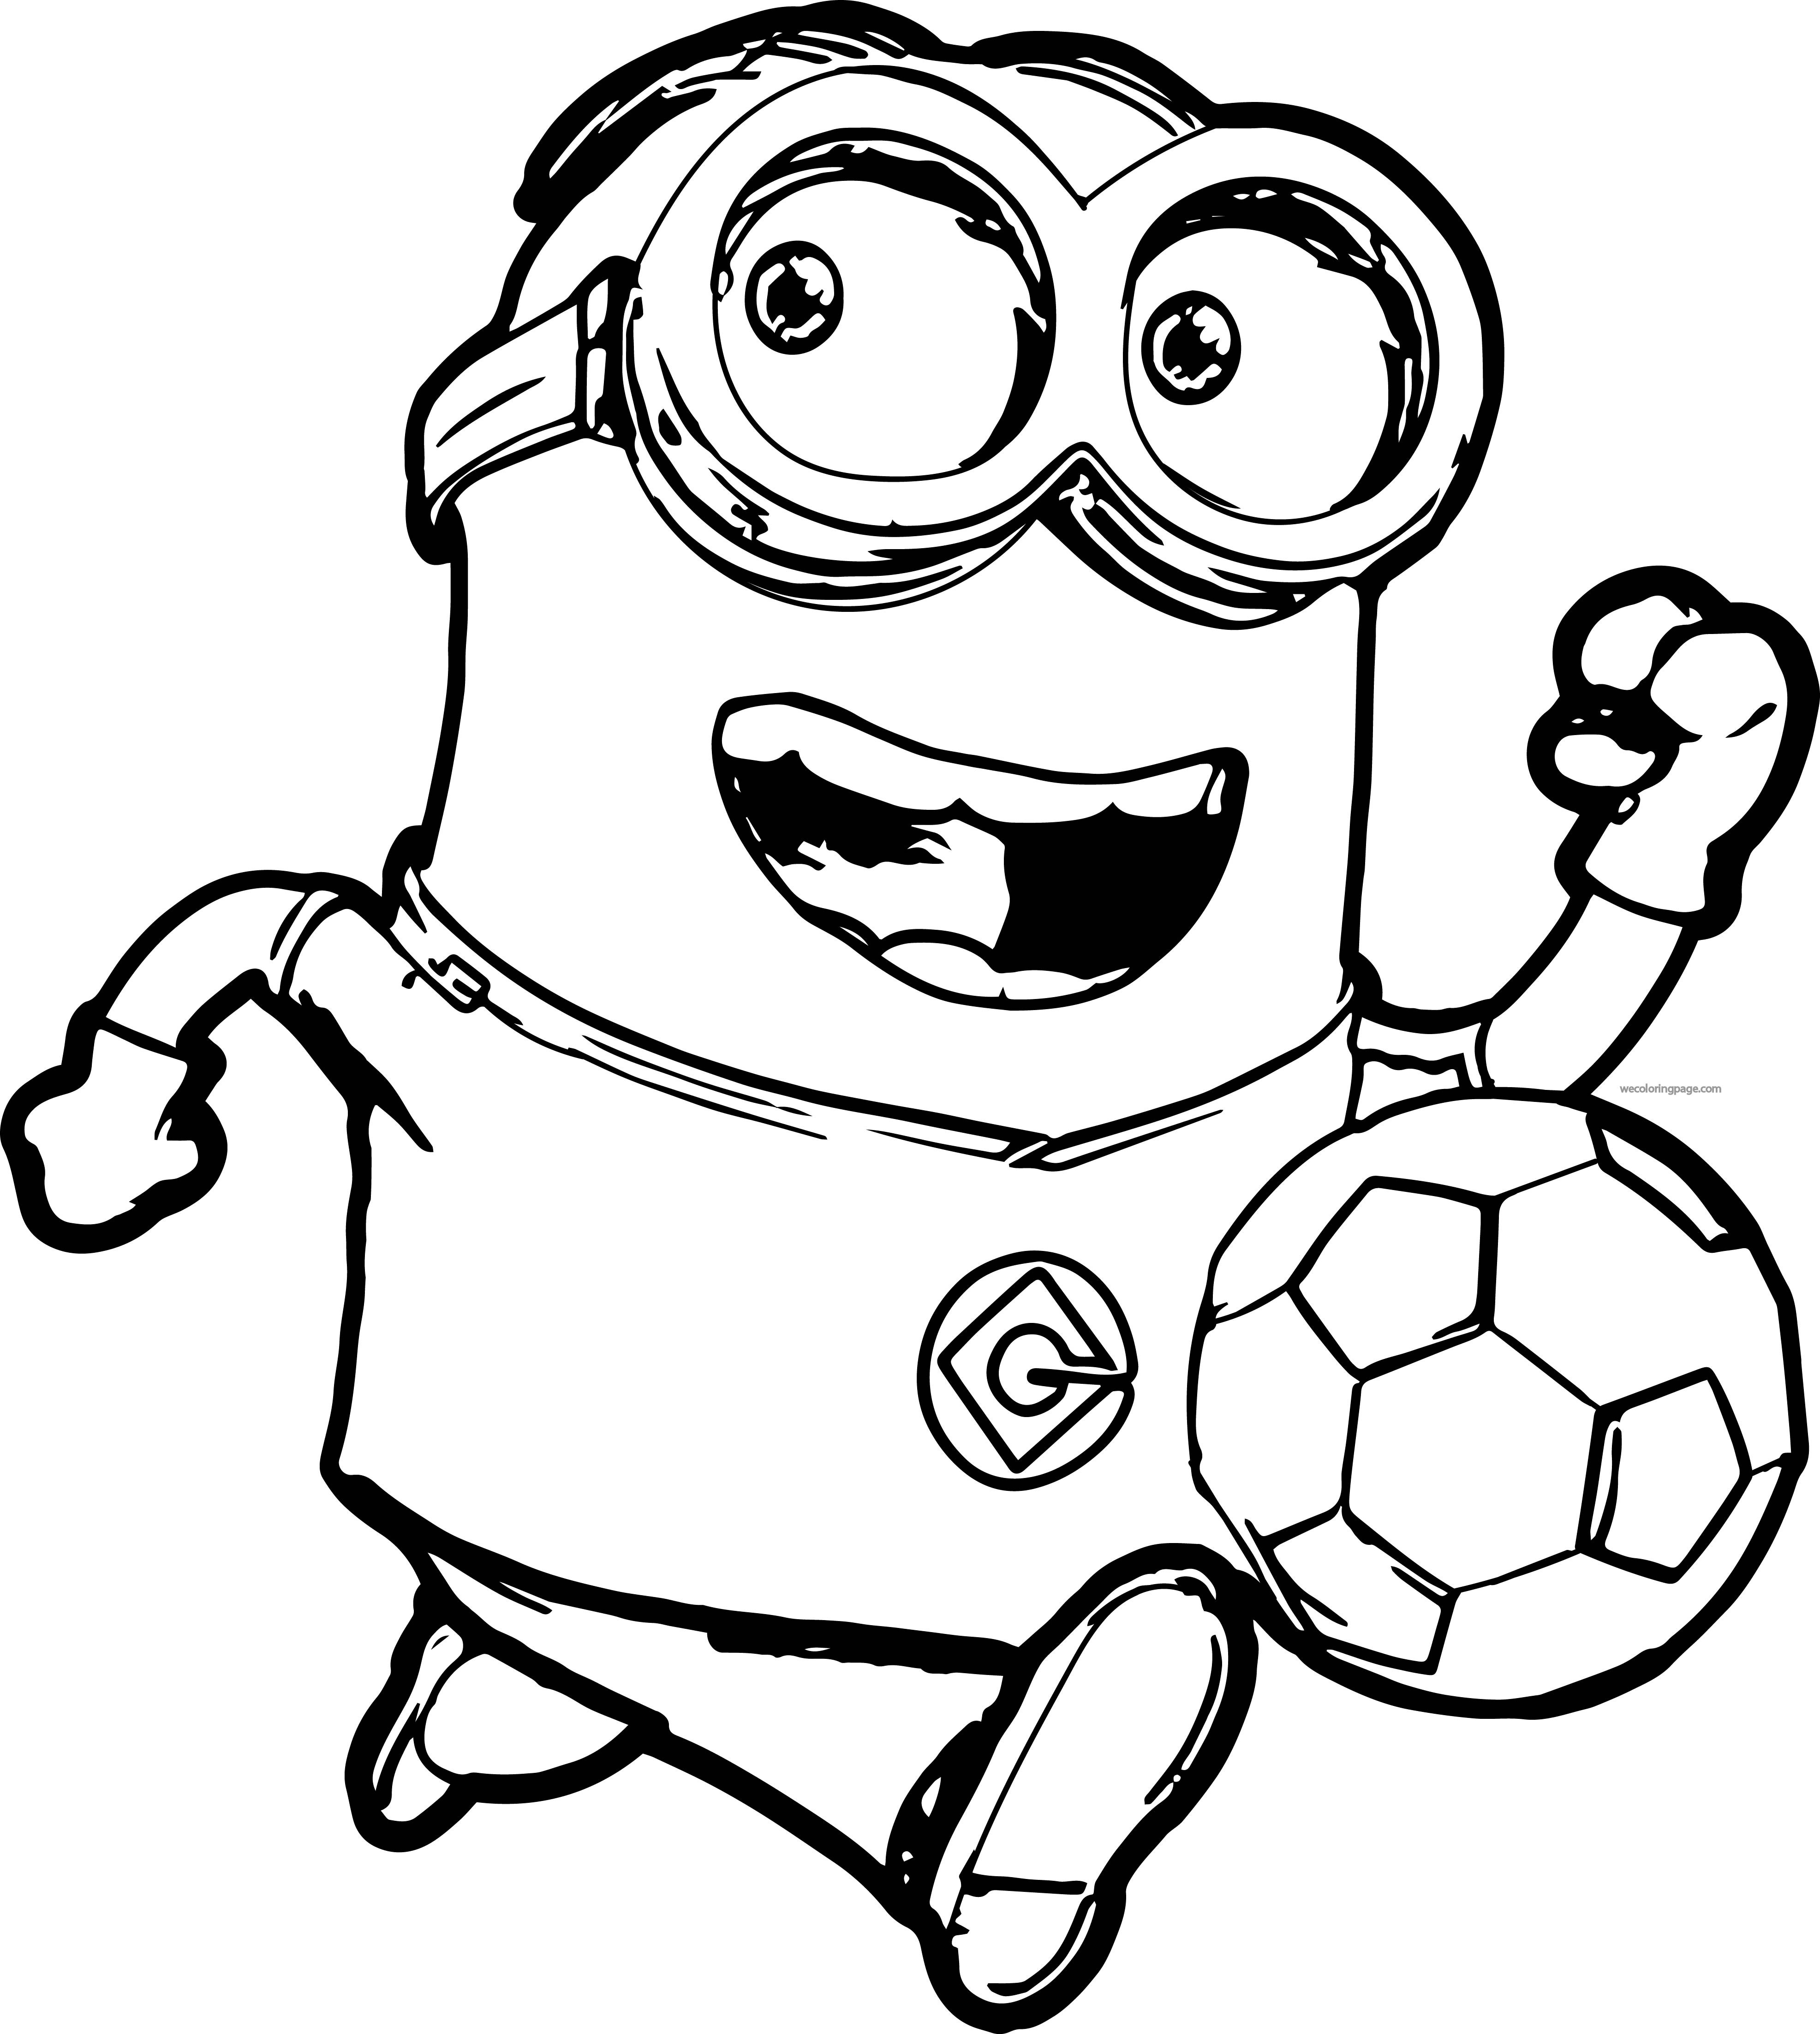 Printable Coloring Book For Kids Download
 Minion Coloring Pages Best Coloring Pages For Kids